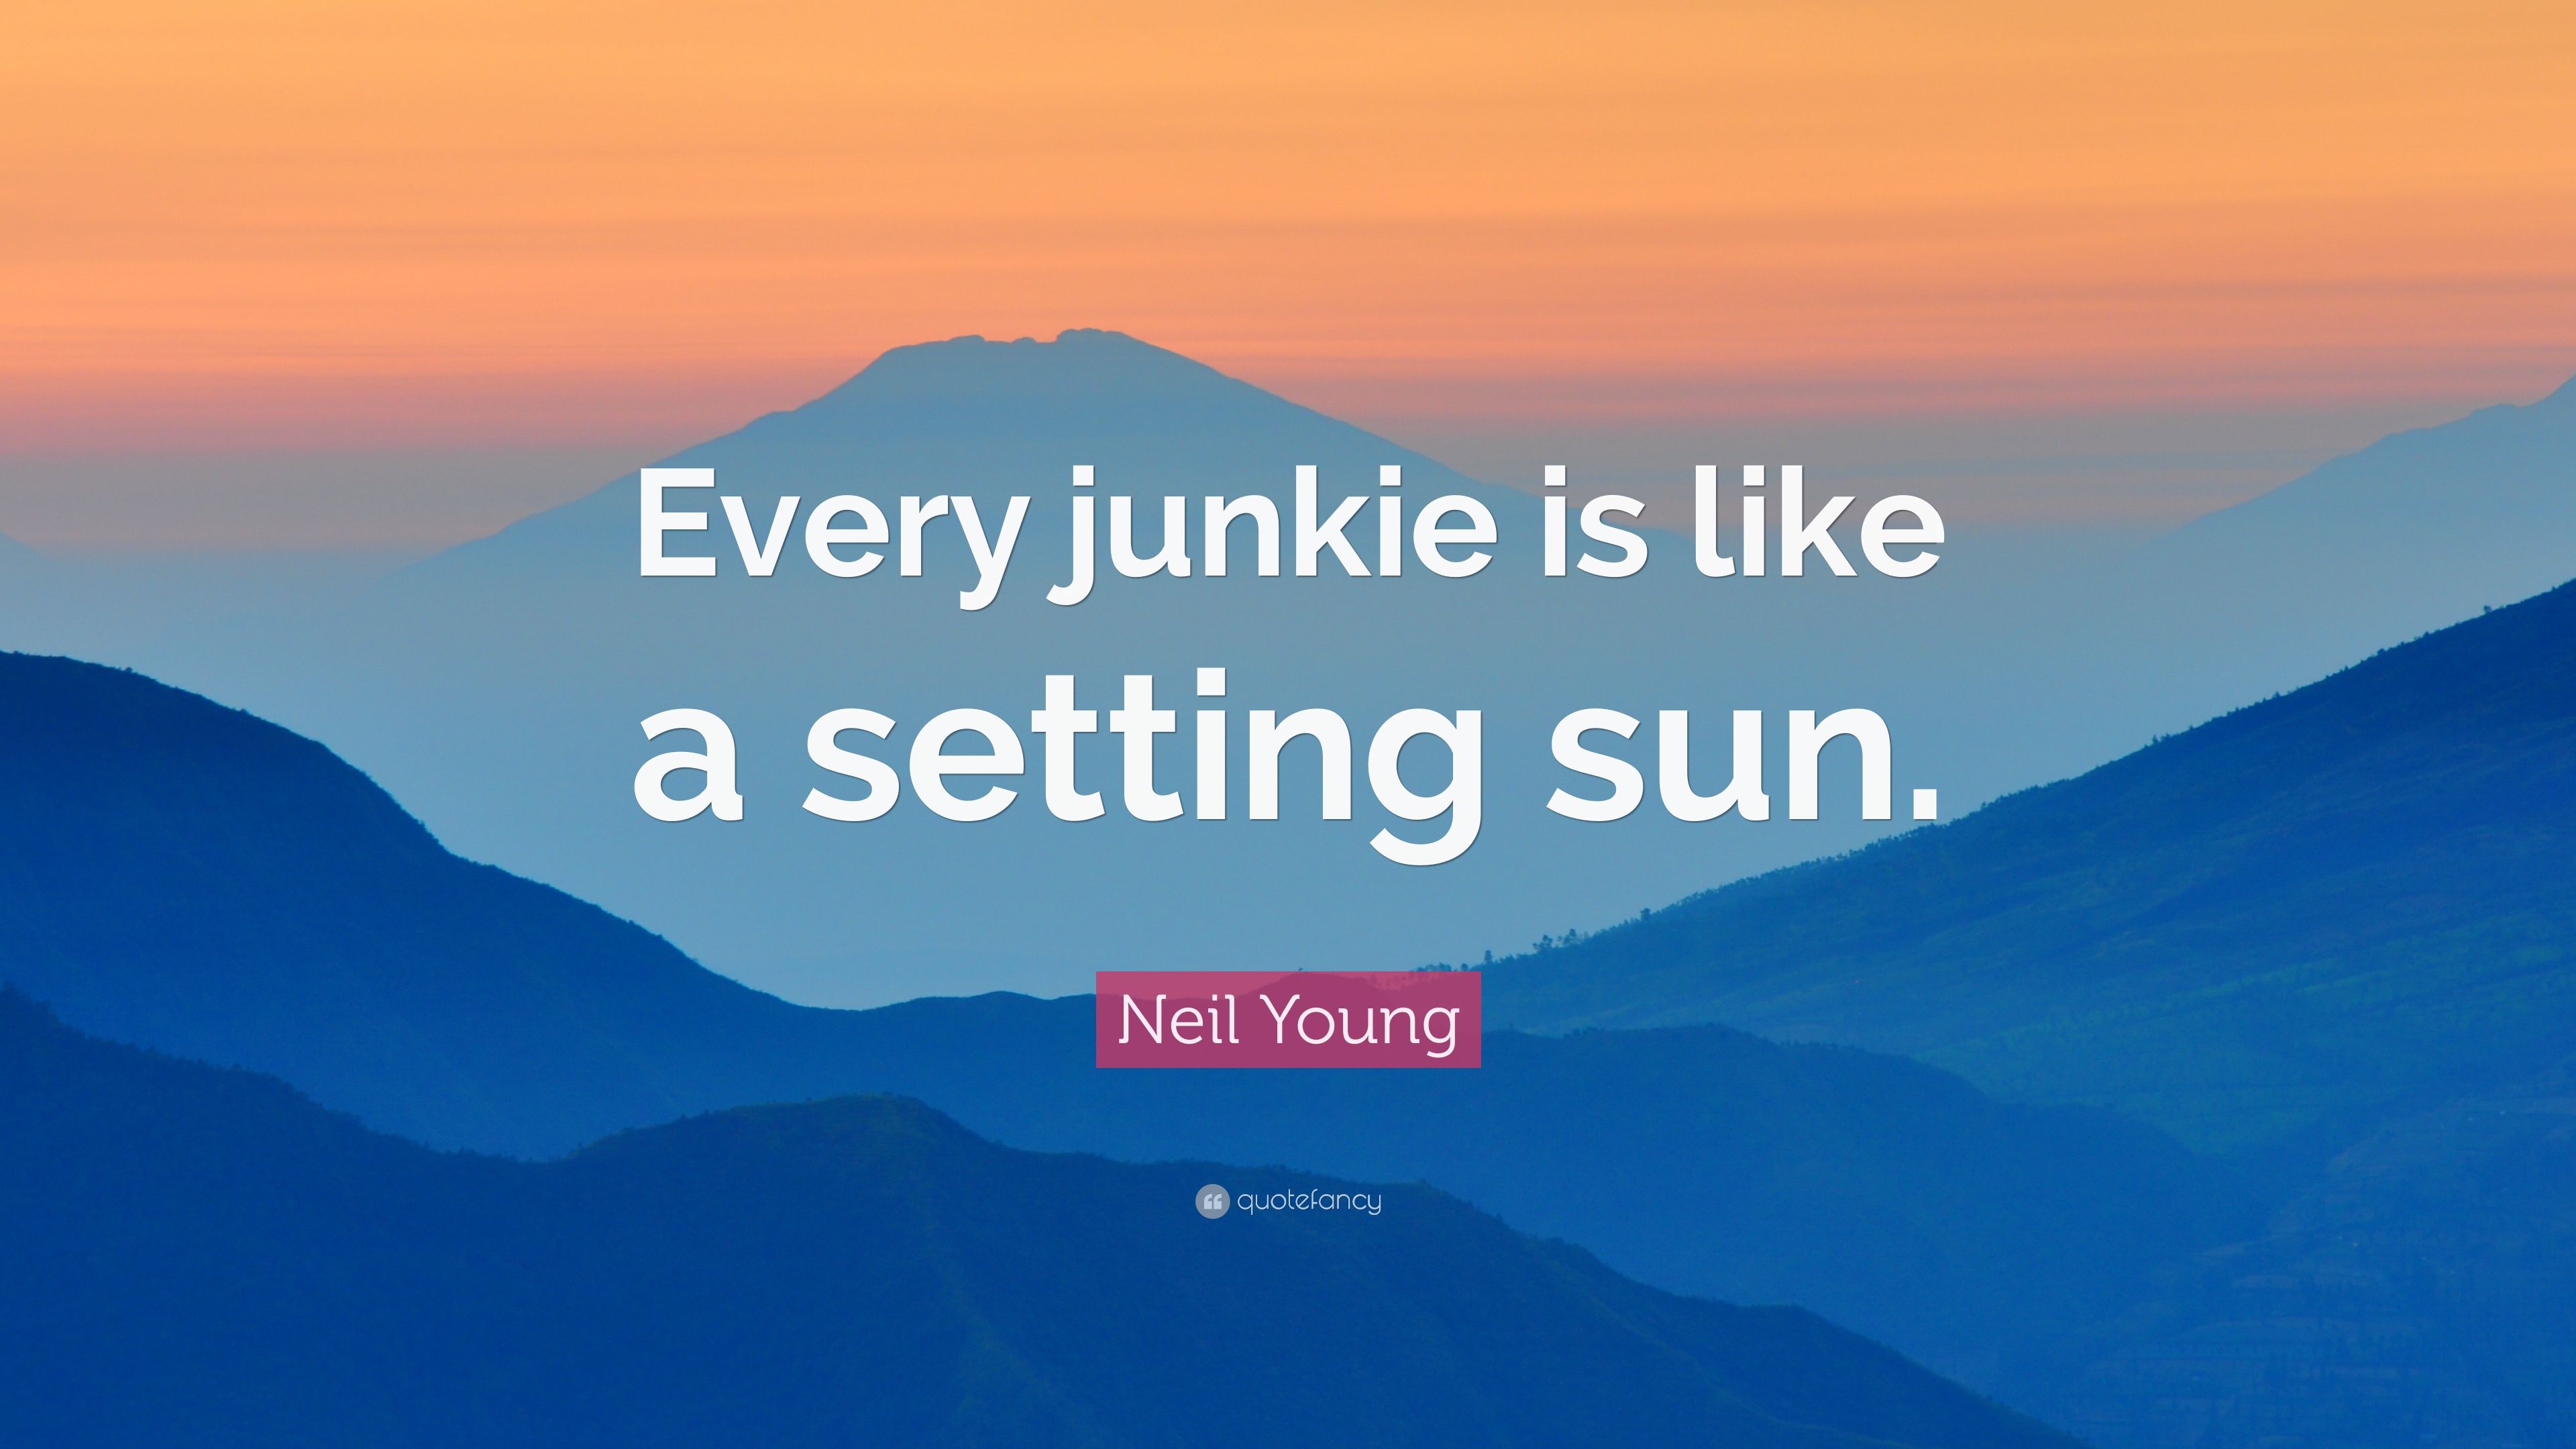 Neil Young Quote: “Every junkie is like a setting sun.” (7 ...